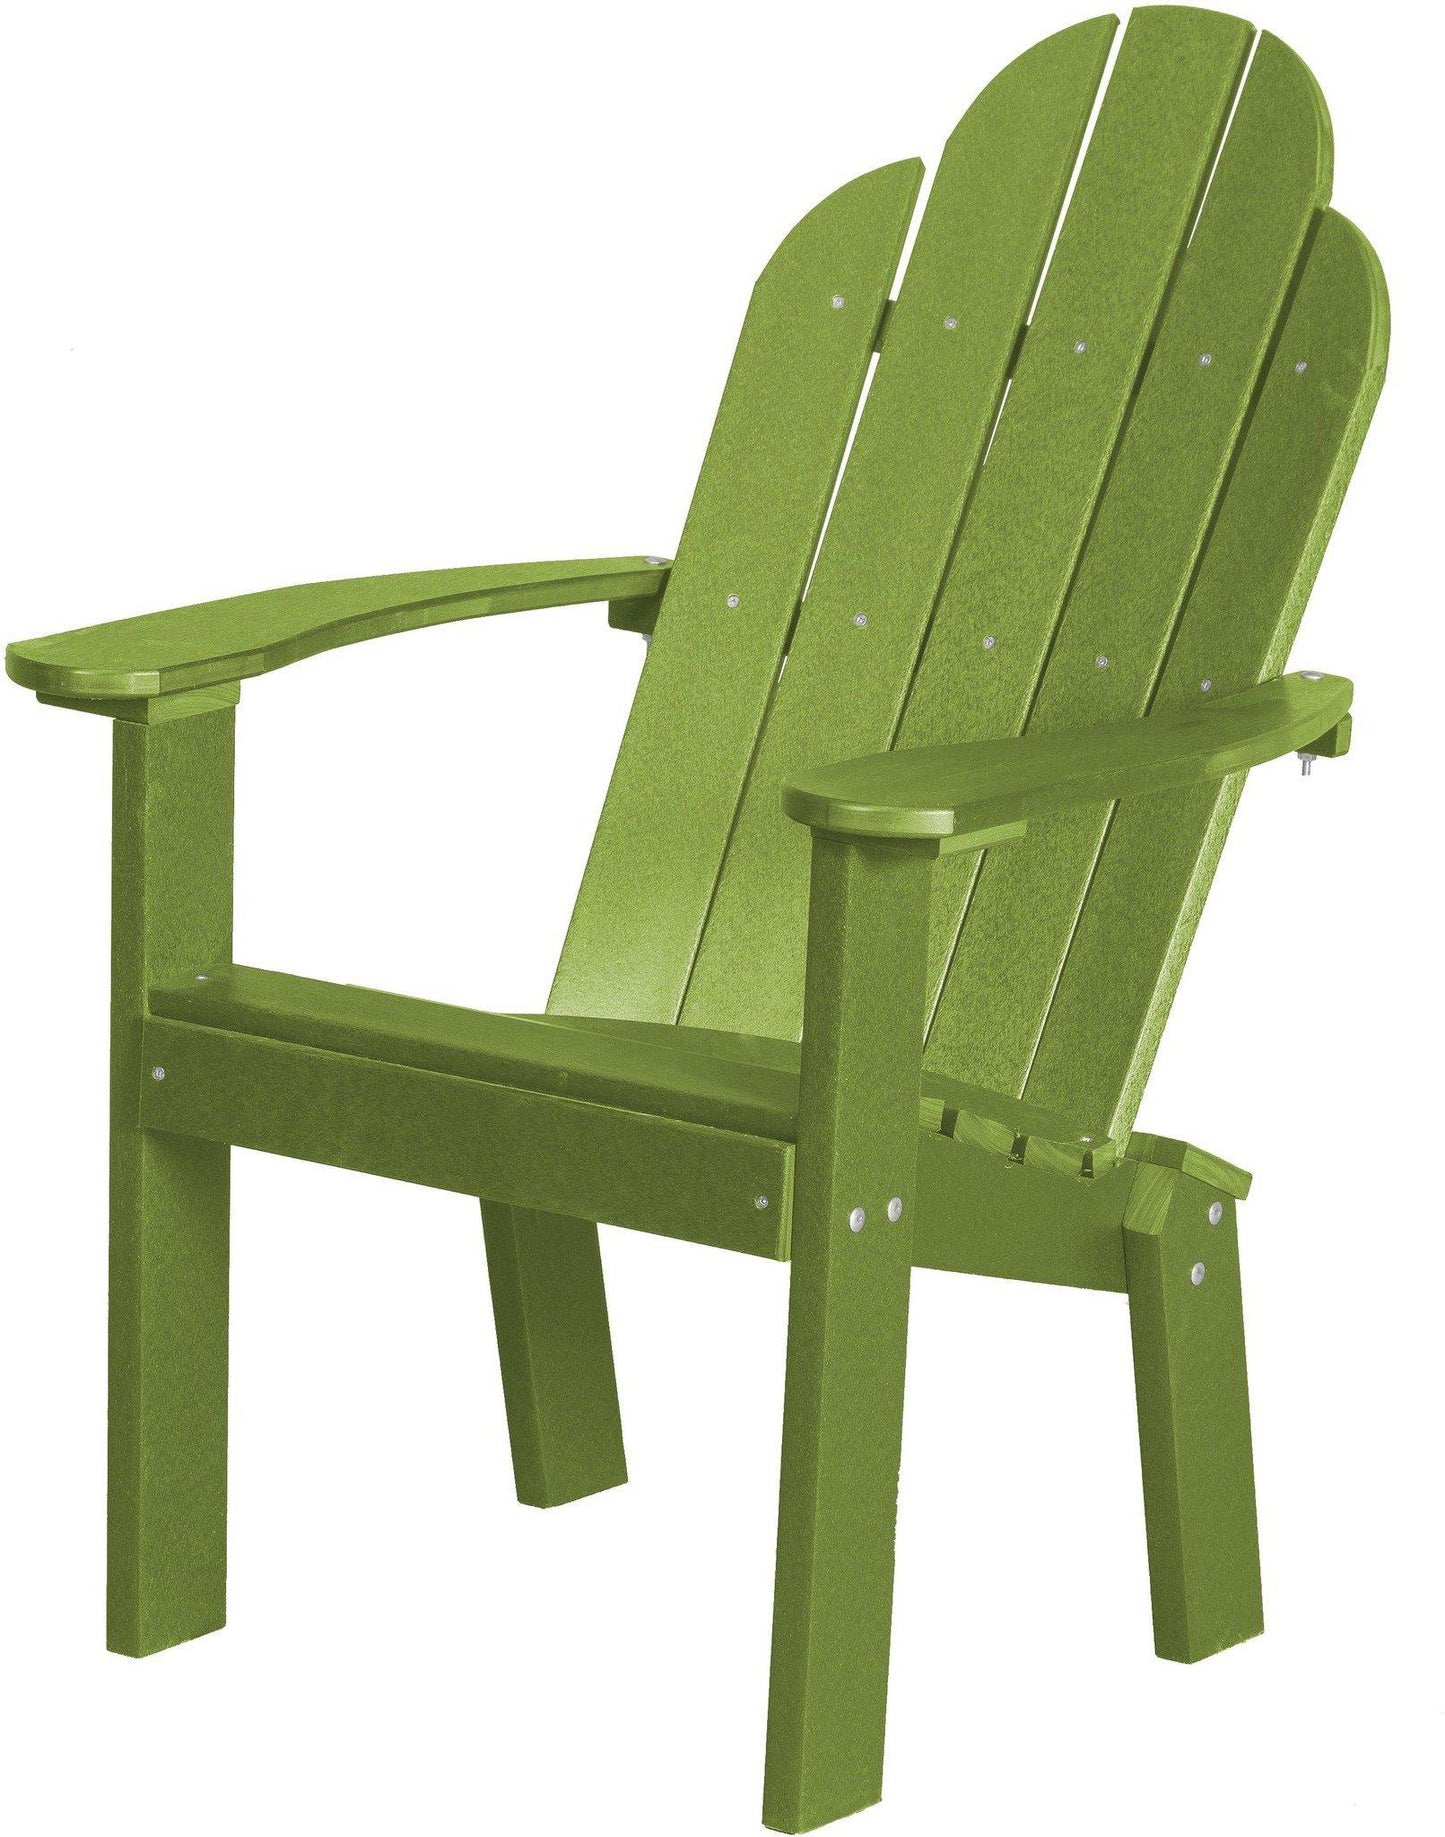 Wildridge Recycled Plastic Heritage Outdoor Dining / Deck Chair - LEAD TIME TO SHIP 4 WEEKS